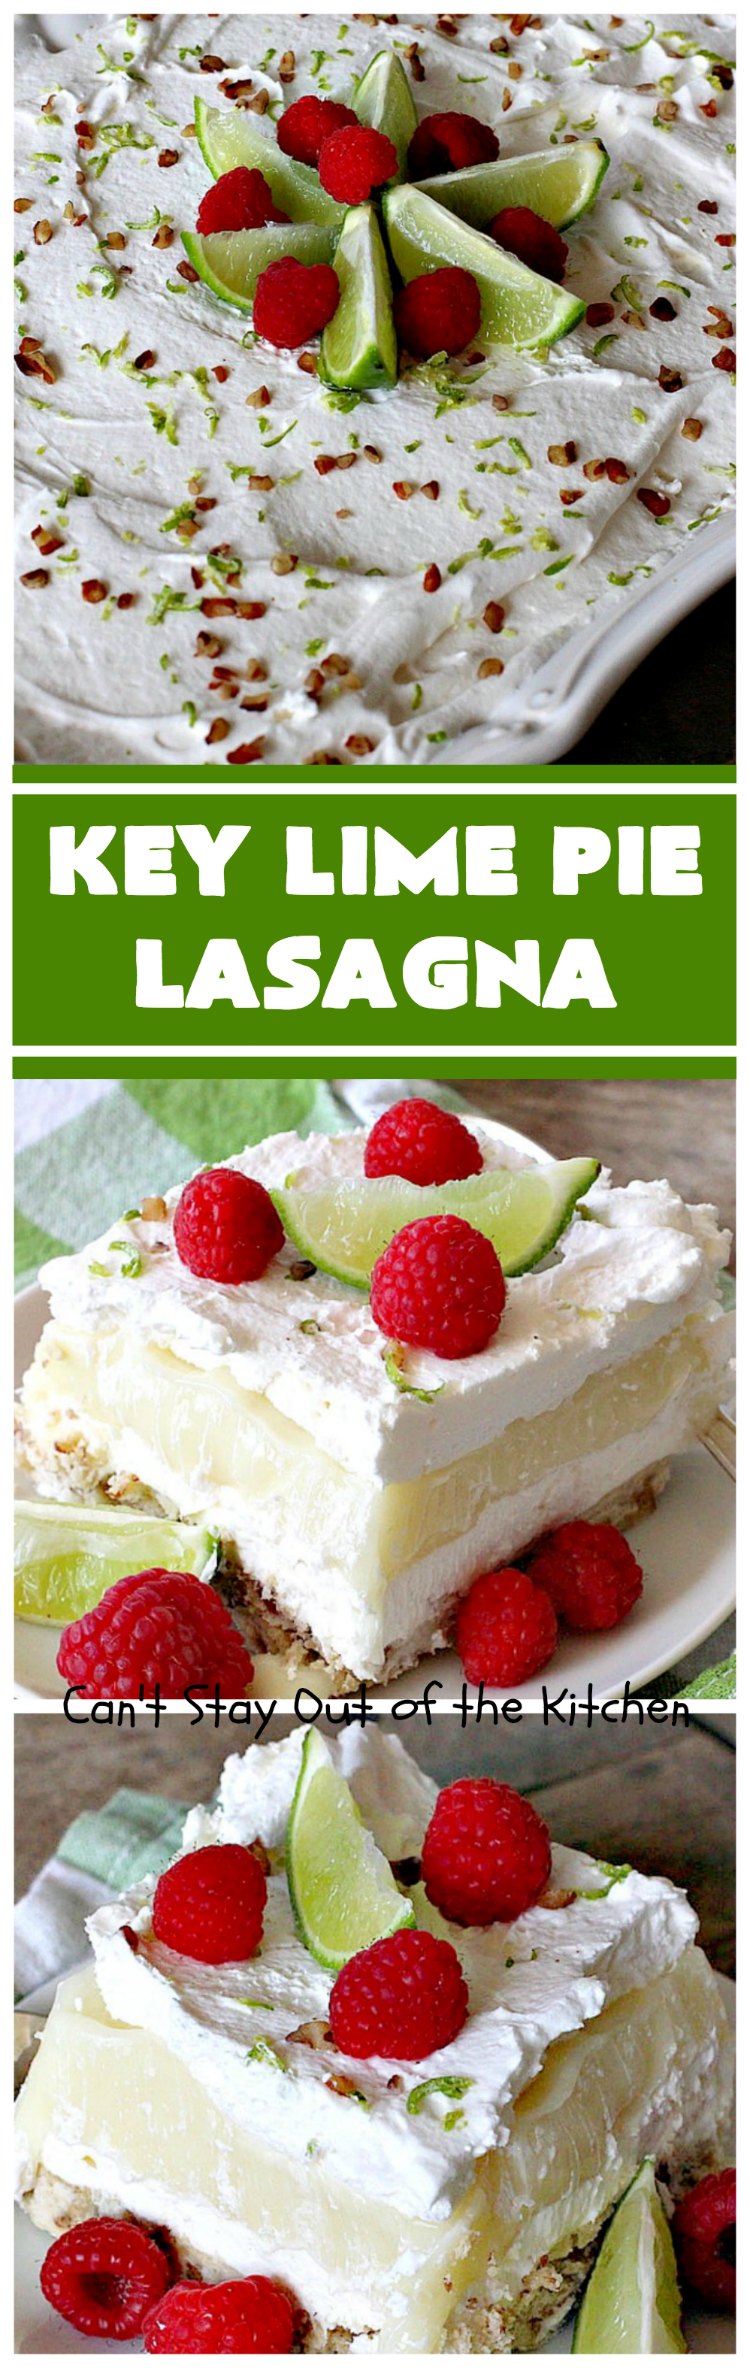 Key Lime Pie Lasagna | Can't Stay Out of the Kitchen